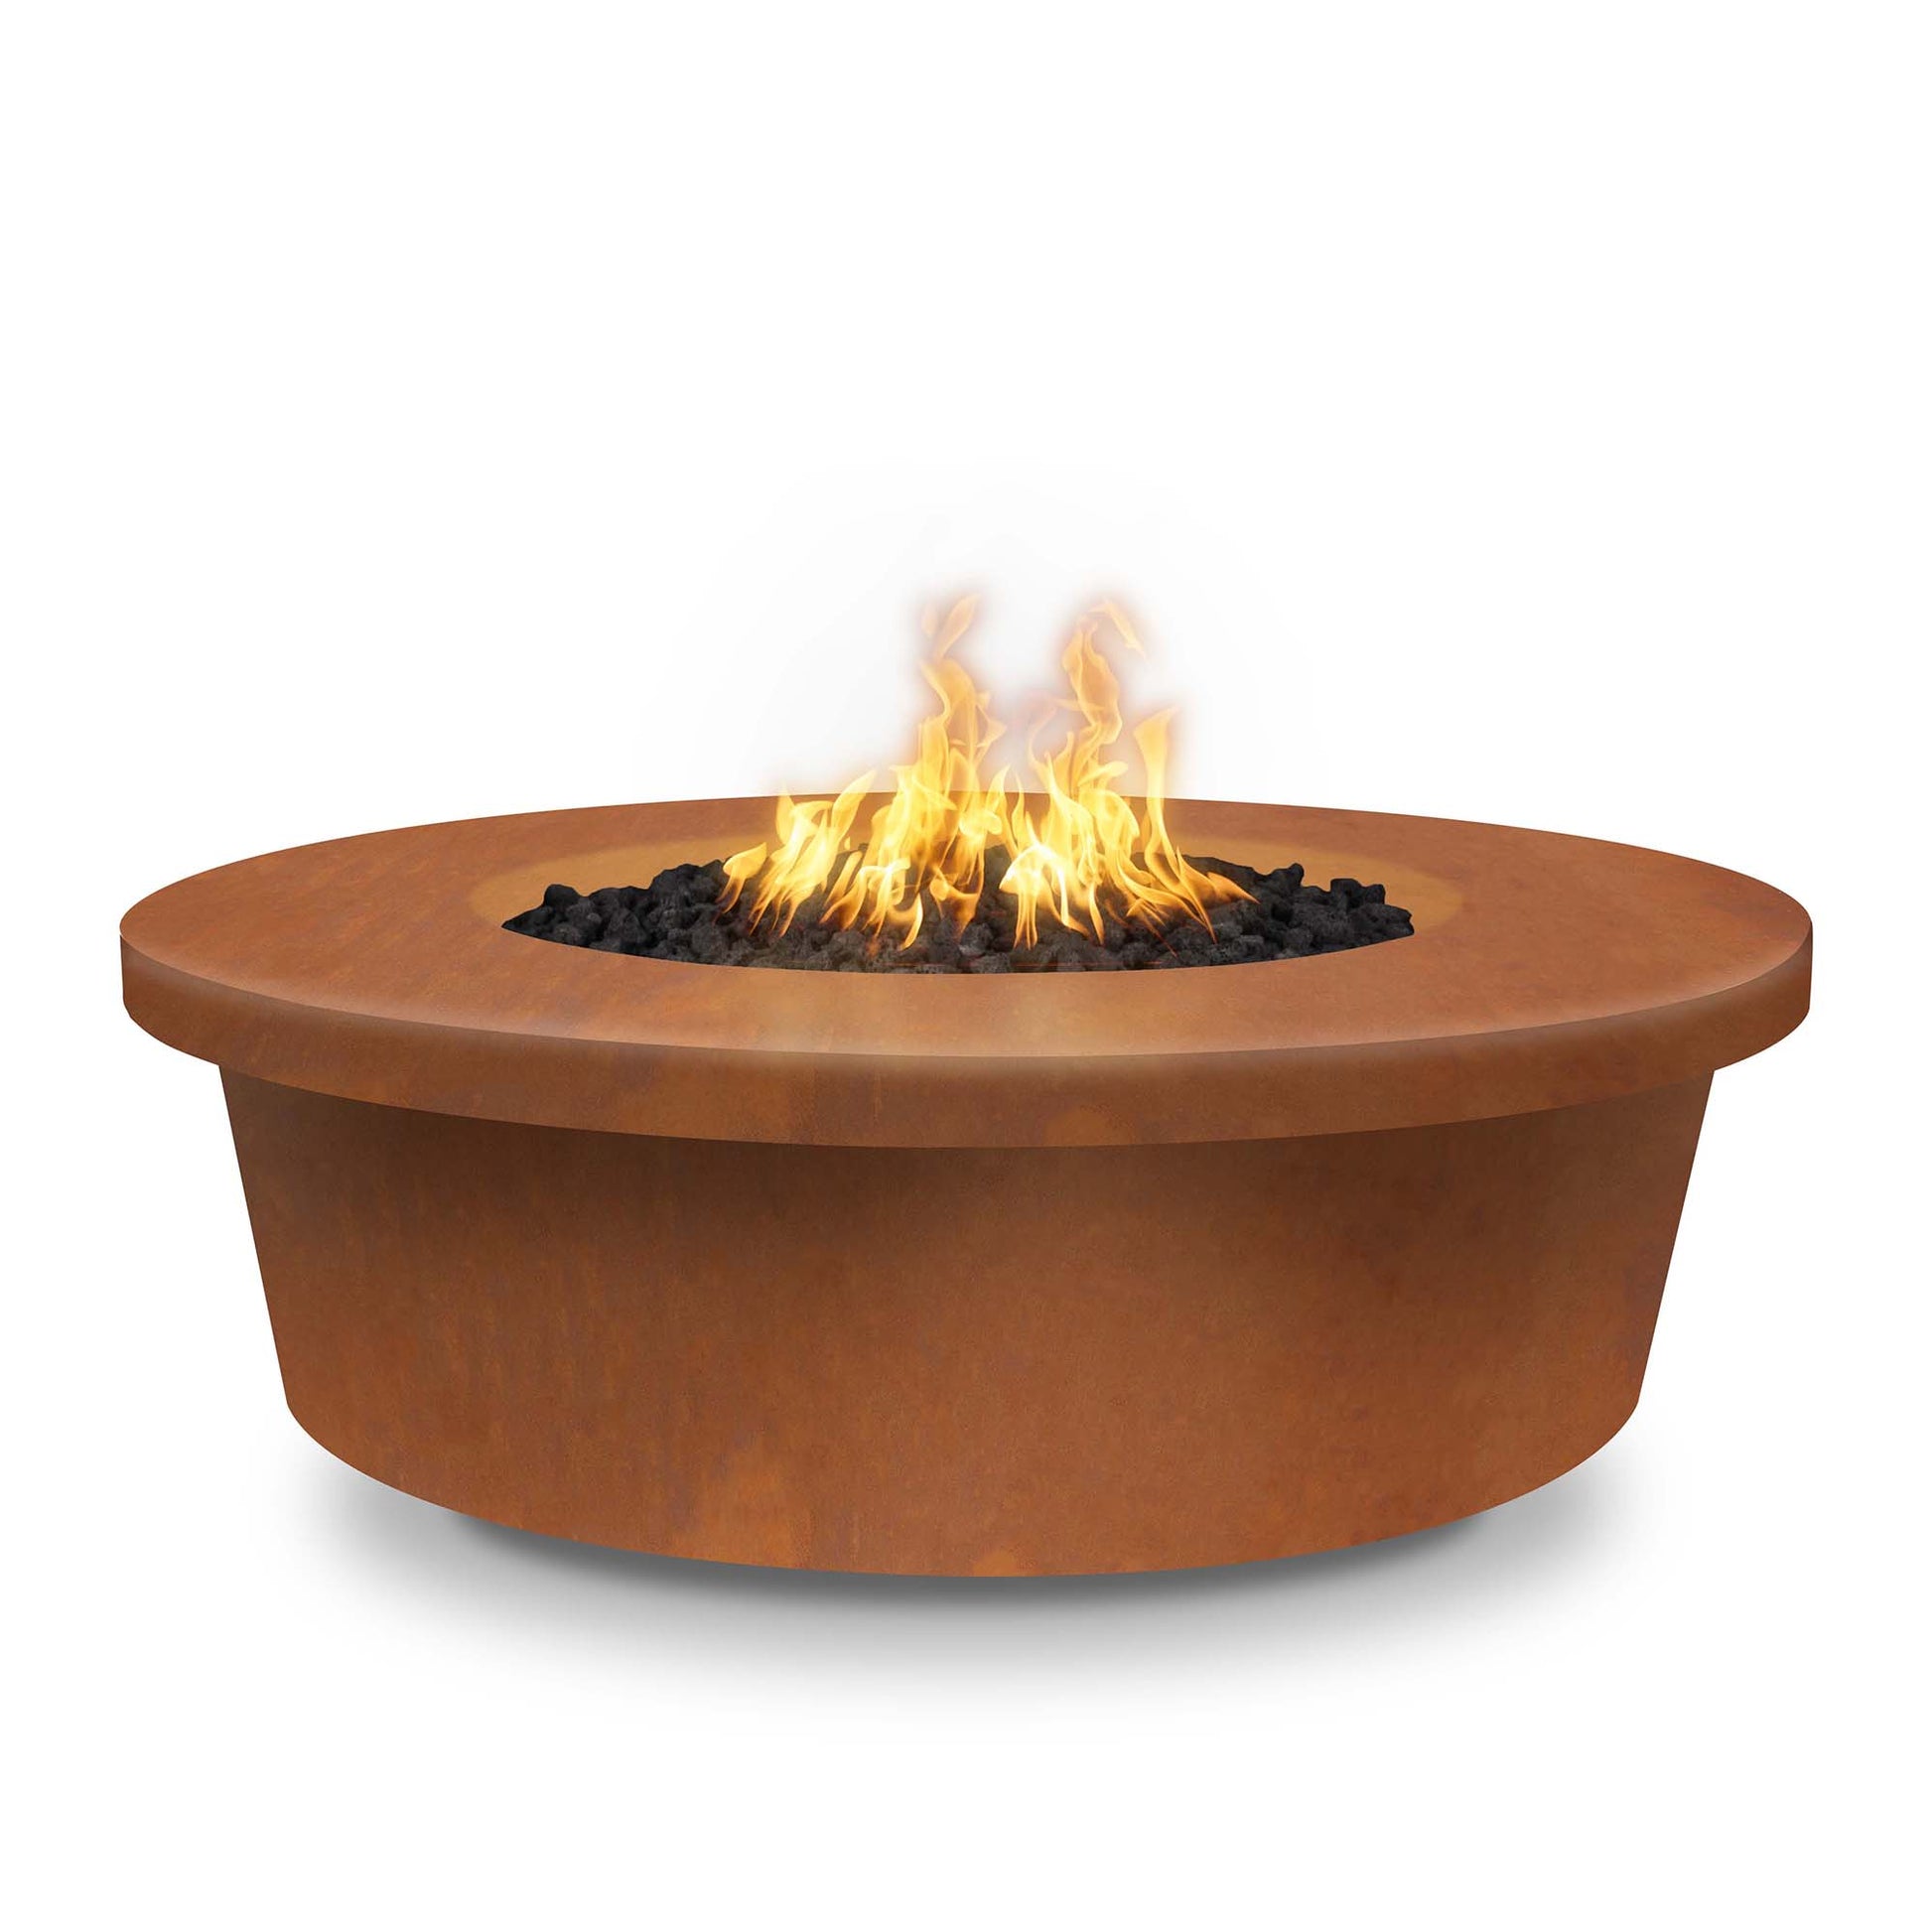 The Outdoor Plus Round Tempe 48" Corten Steel Liquid Propane Fire Pit with Match Lit Ignition